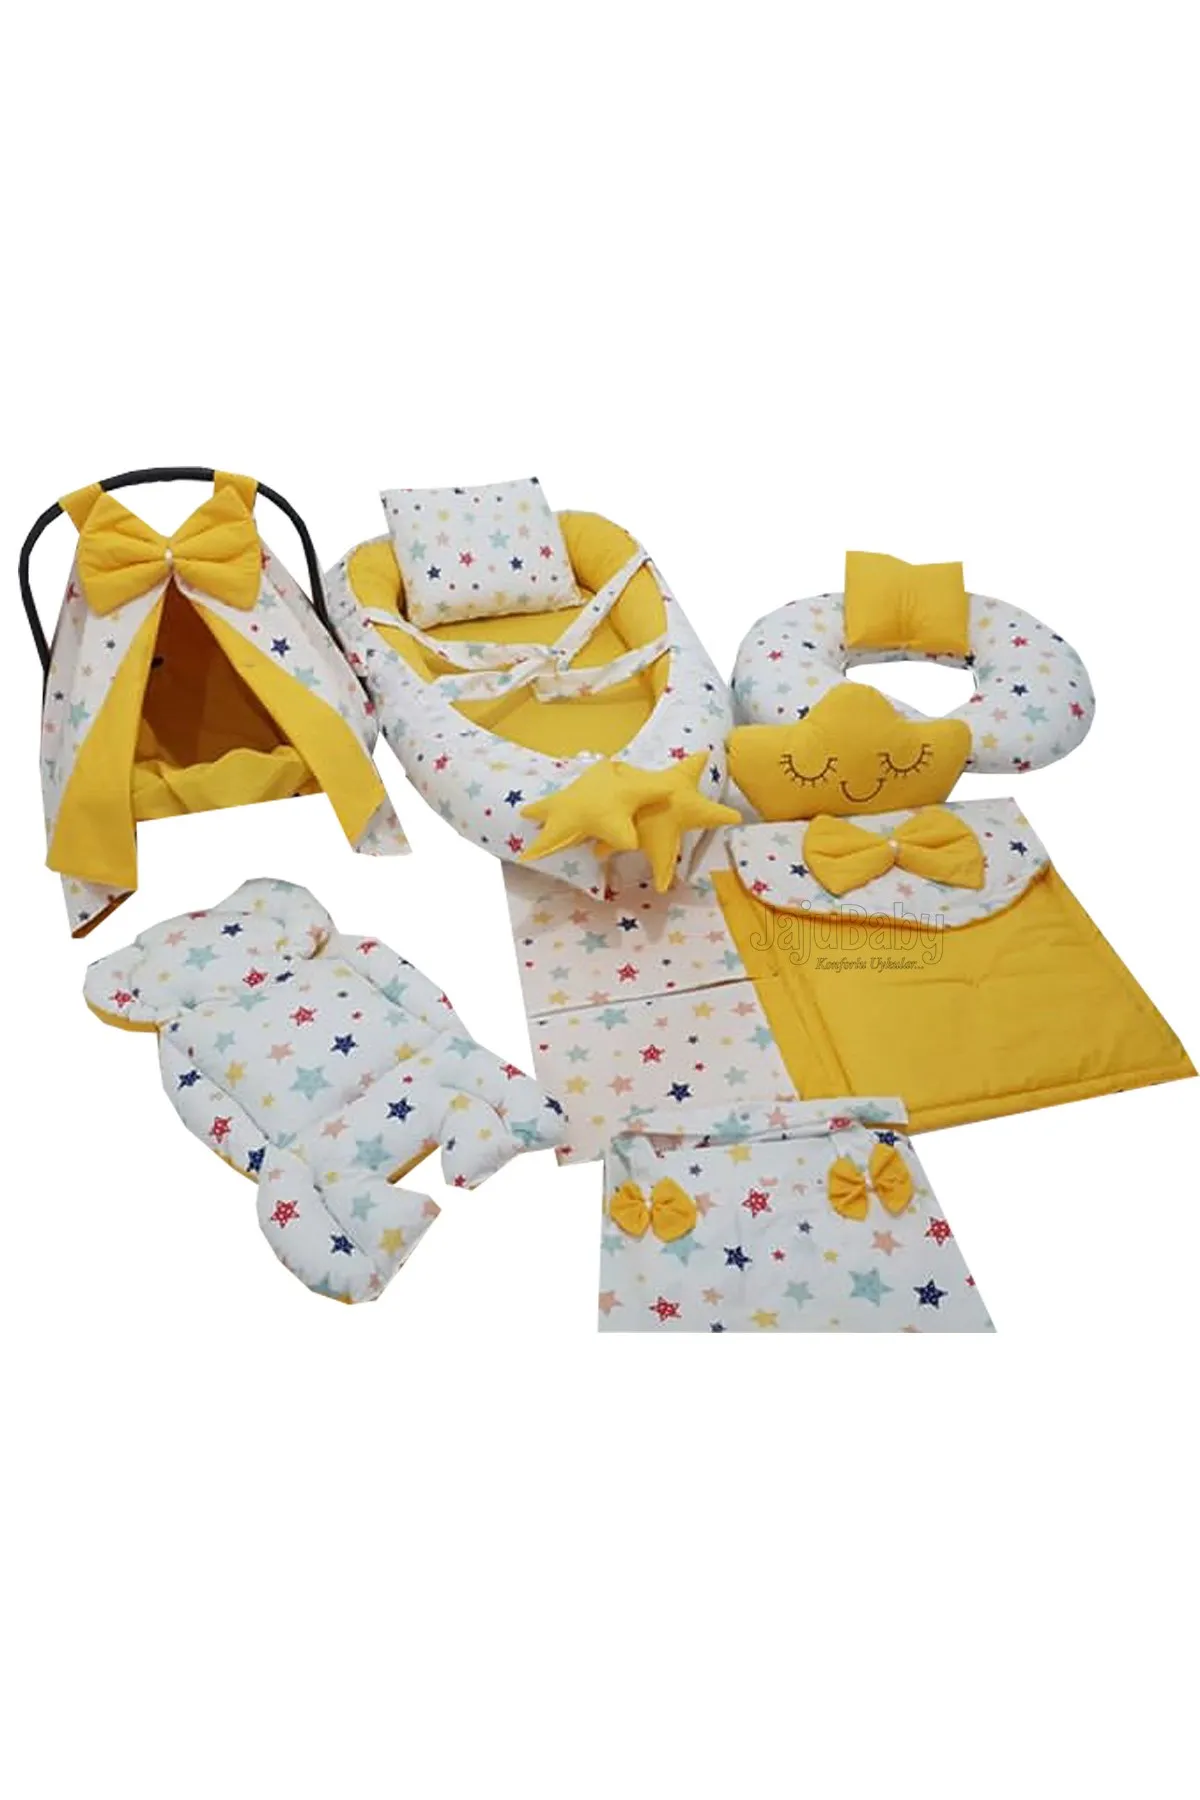 Jaju Baby Handmade, Colorful Star Yellow Design 9 Piece Full Babynest Set Breastfeeding Pillow Stroller Cover Portable Baby Bed